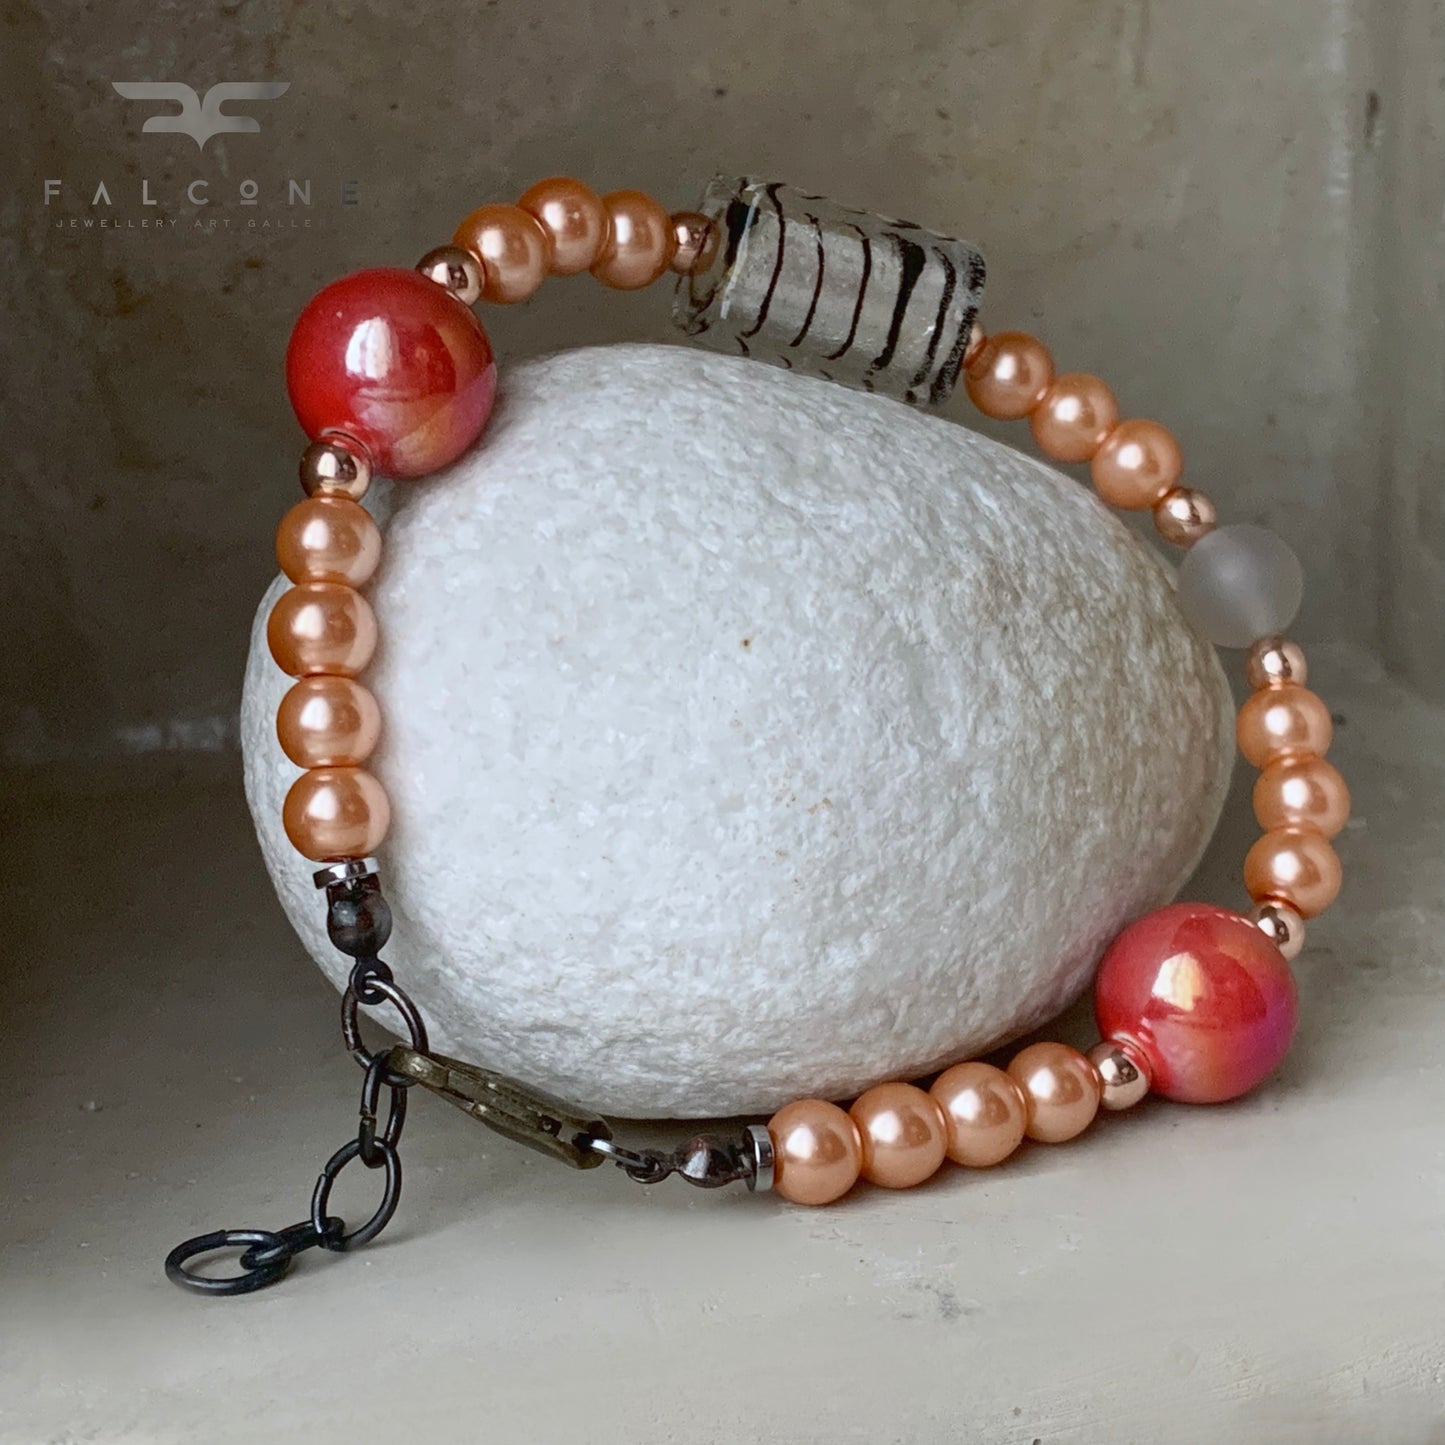 Adjustable bracelet of glass pearls, Venetian glass, gemstones and ceramics 'In the Clouds'